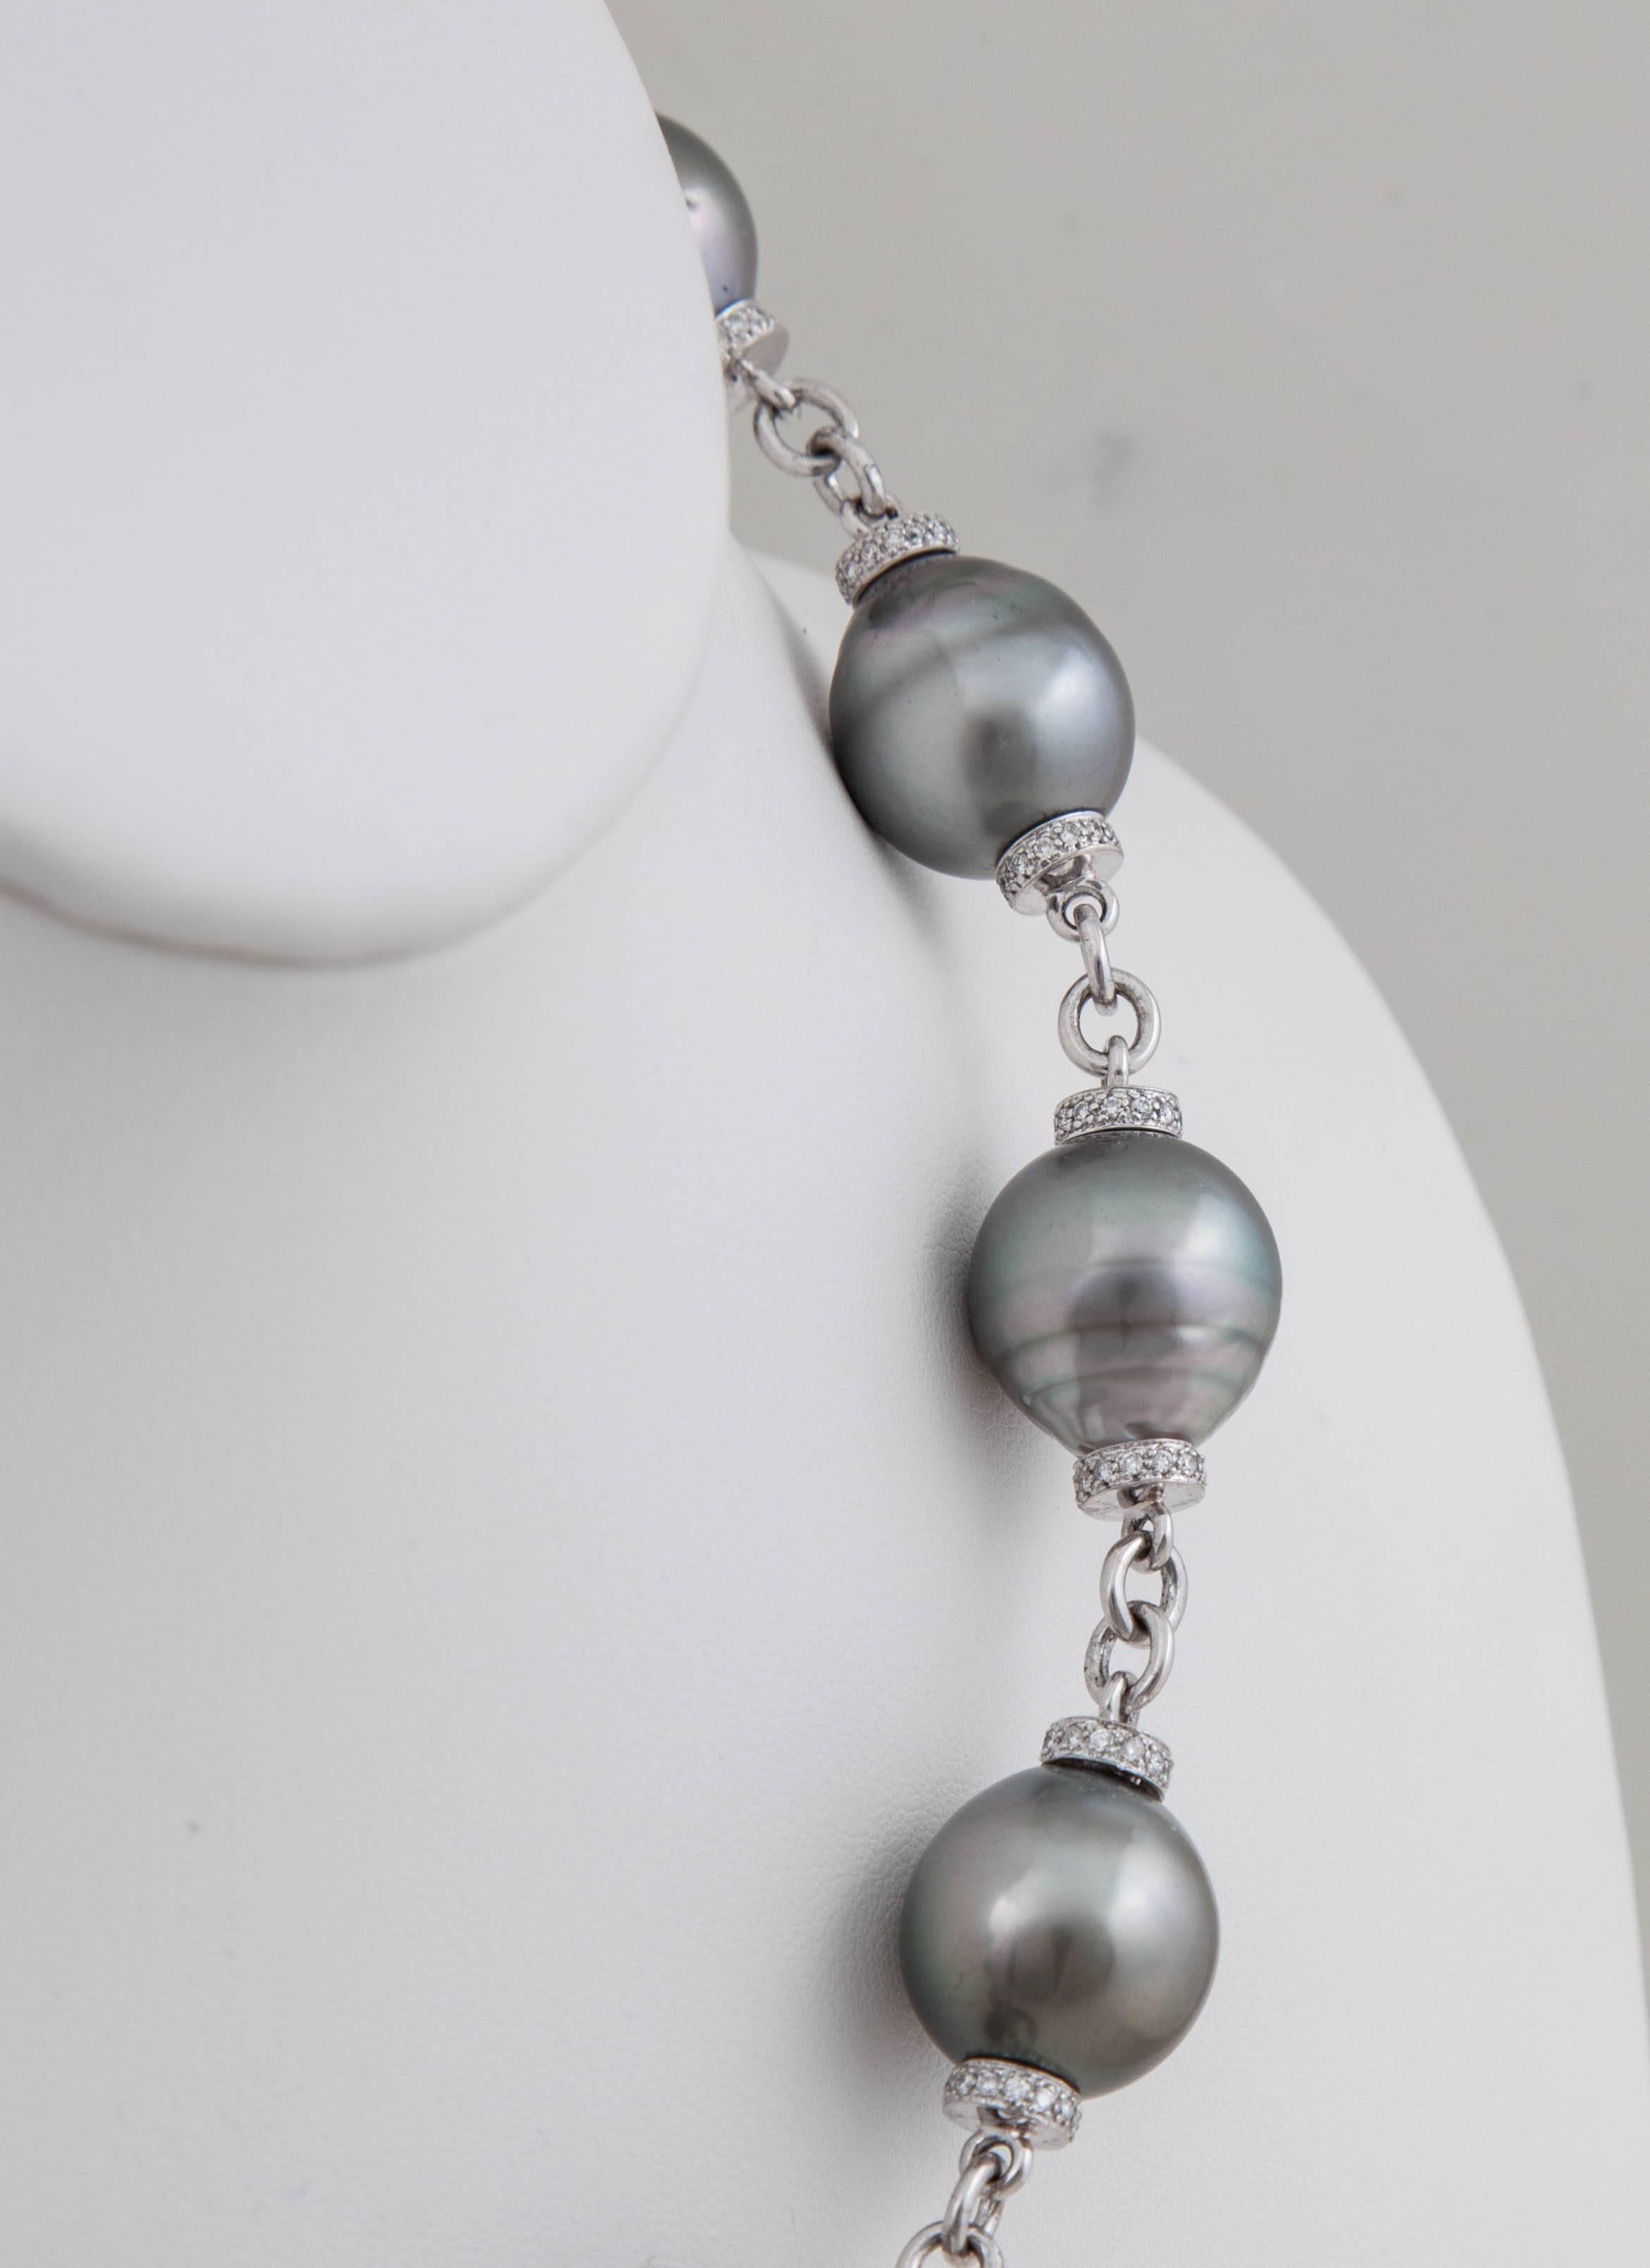 The 15x17mm natural color baroque Tahitian pearls on this bold necklace are surrounded by 2.66ct of understated diamonds. 

This necklace is 19.25